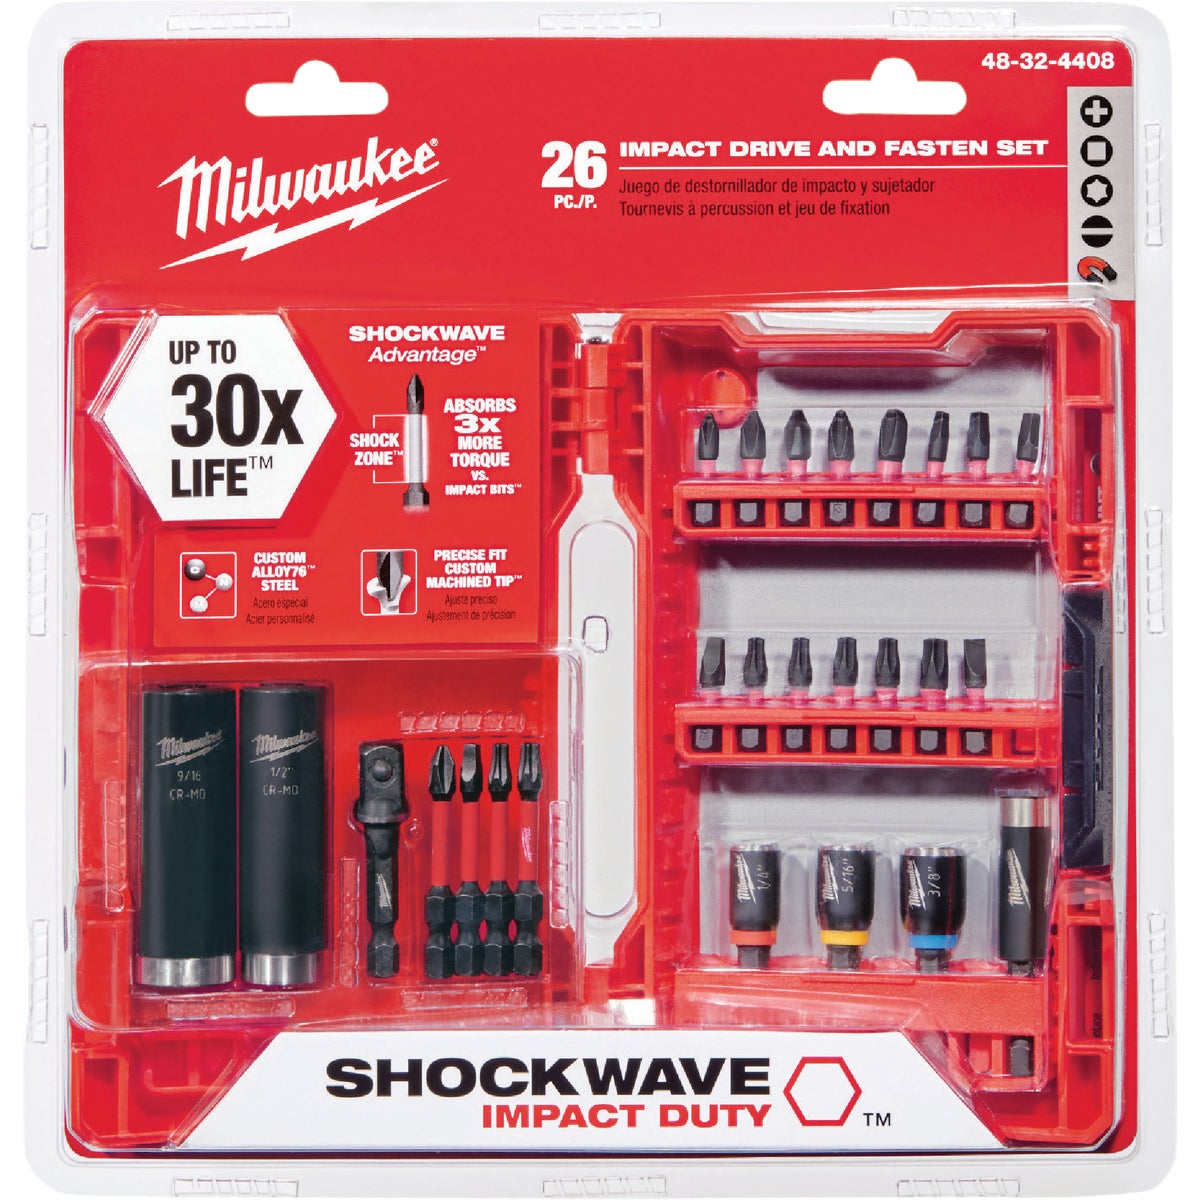 Item 303065, Milwaukee Shockwave Impact Duty Driver Bit Sets are engineered for extreme 